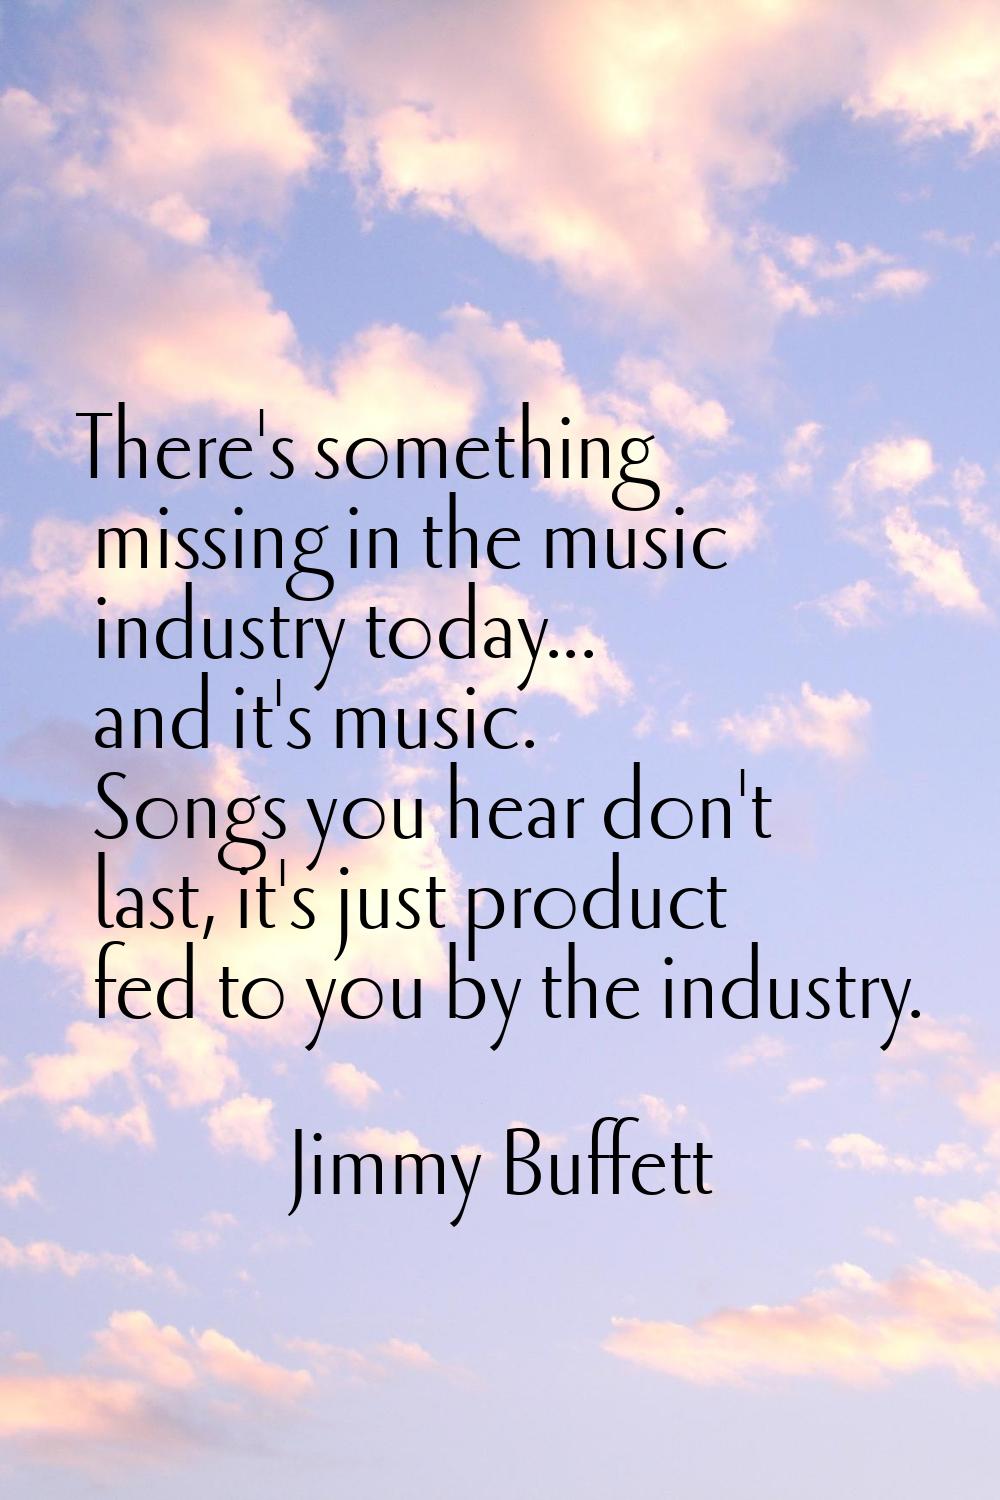 There's something missing in the music industry today... and it's music. Songs you hear don't last,